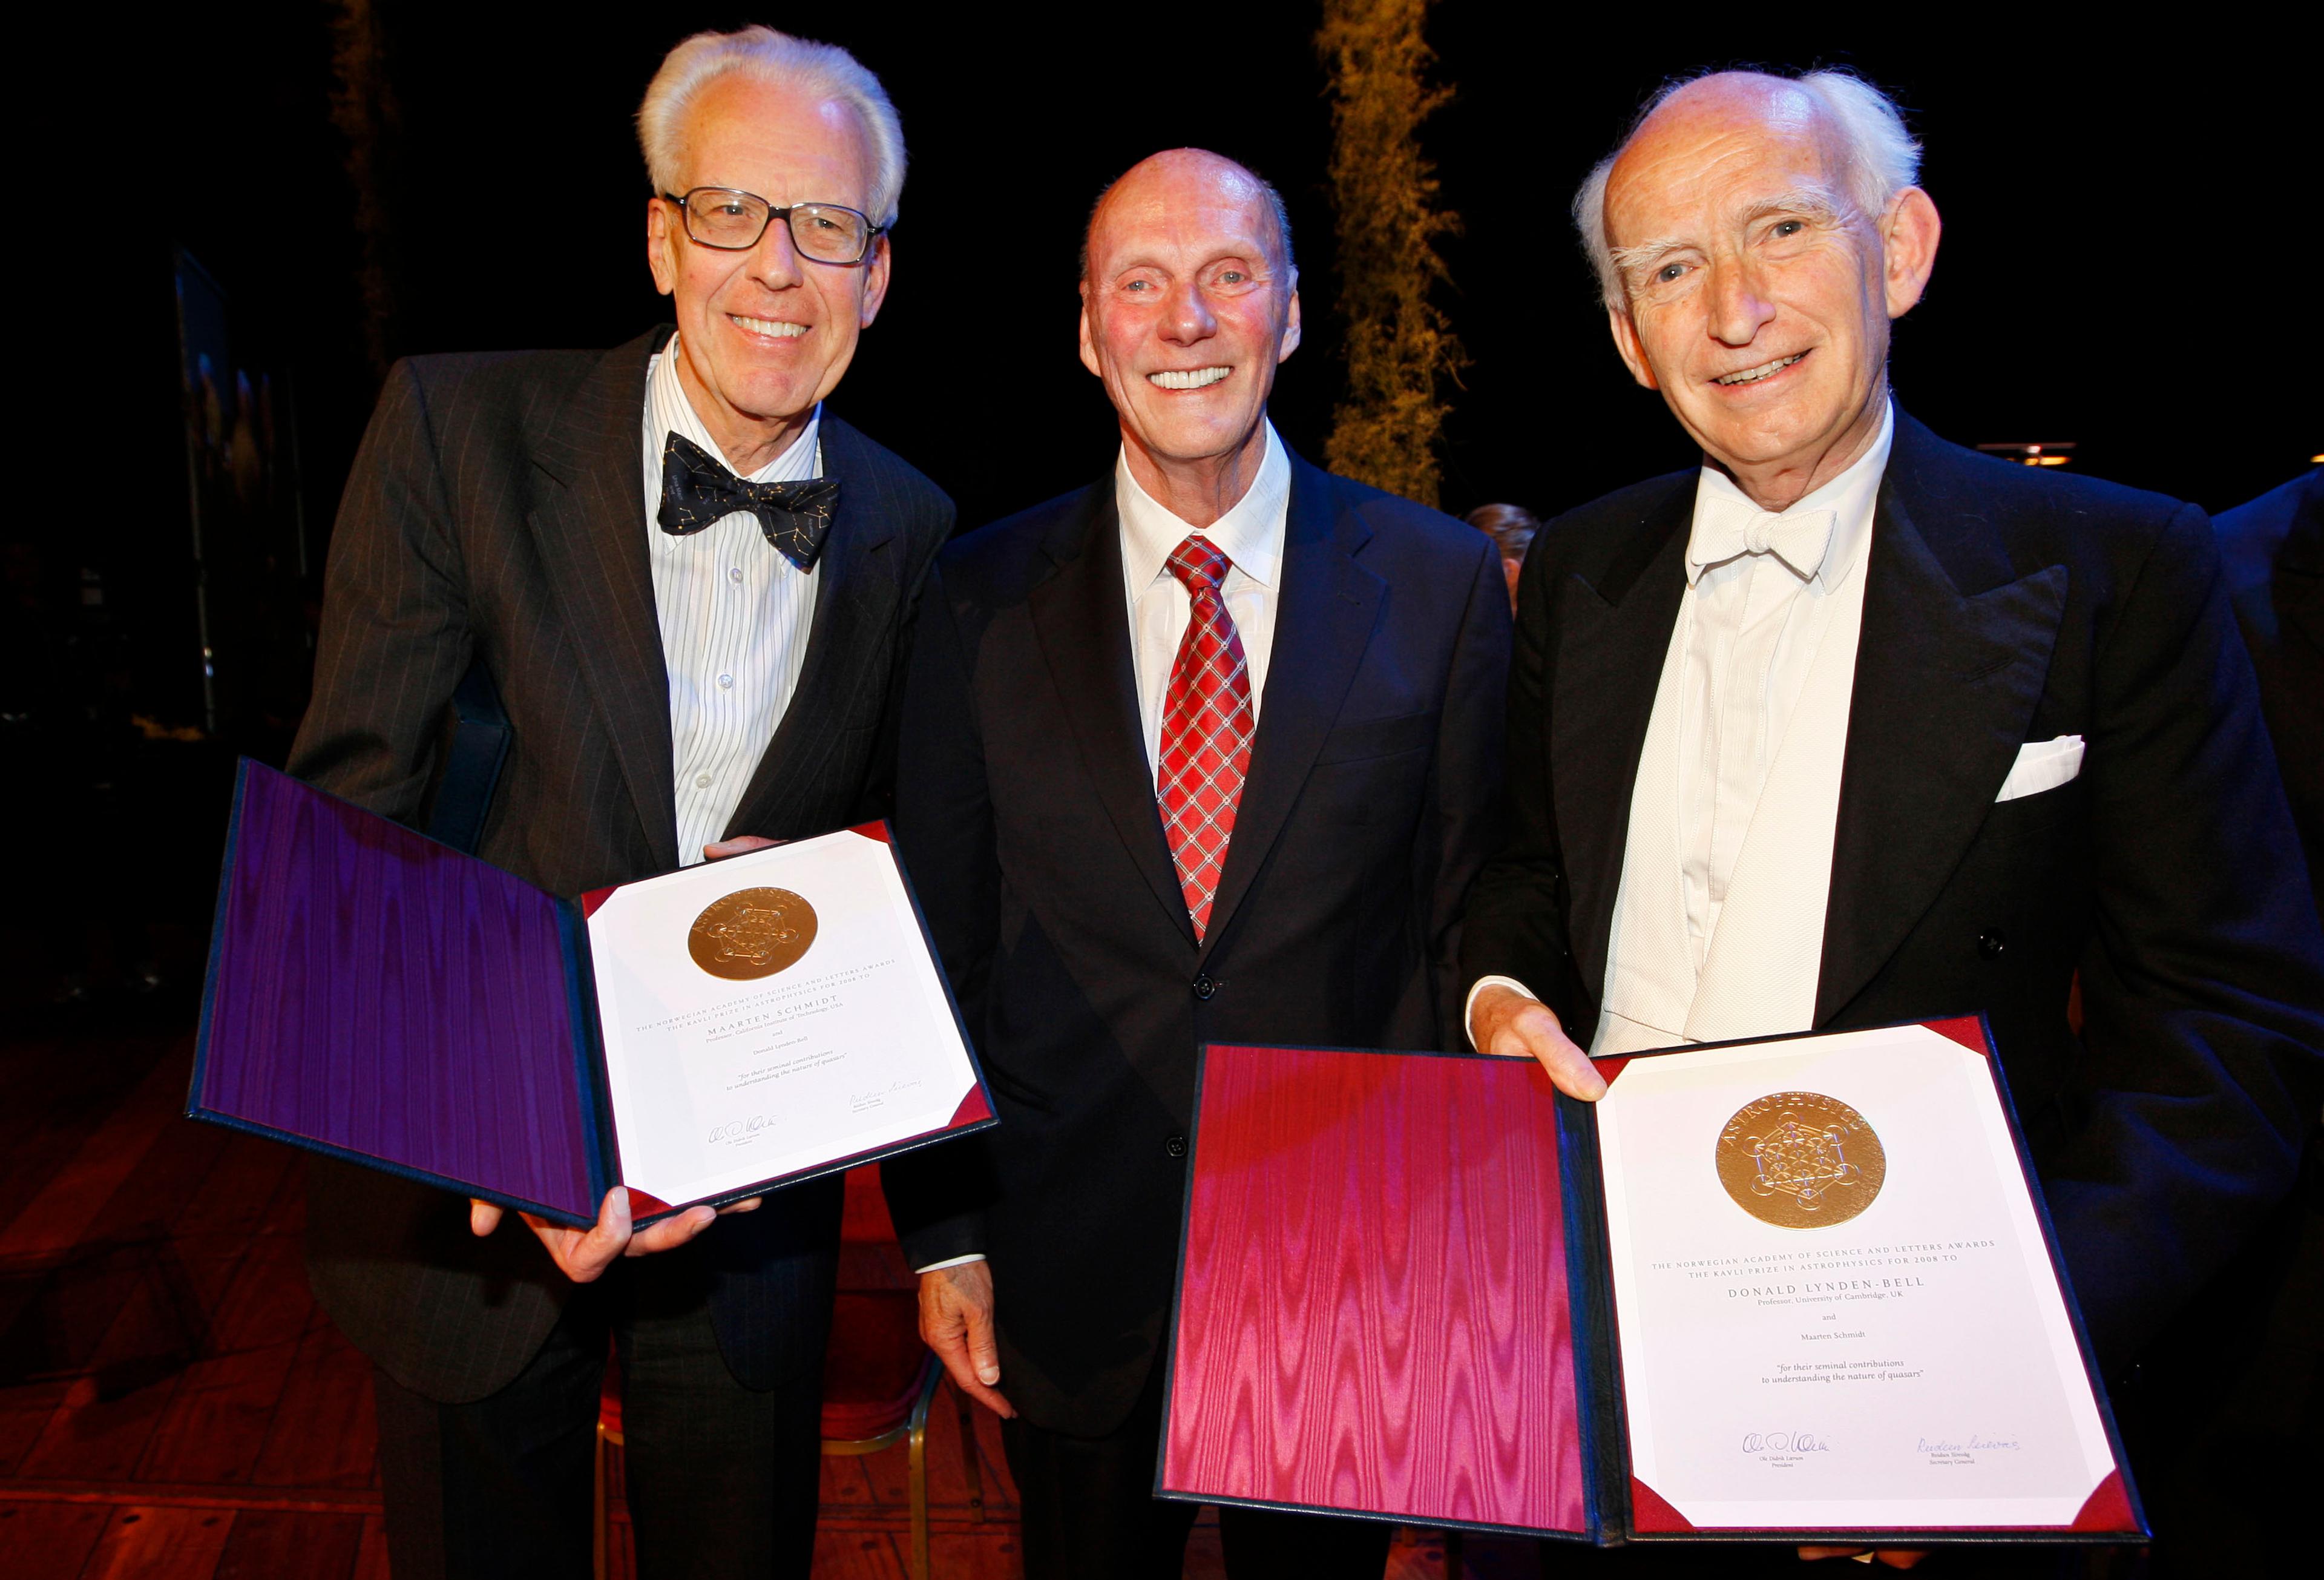 The 2008 Kavli Prize astrophysics laureates together with Fred Kavli